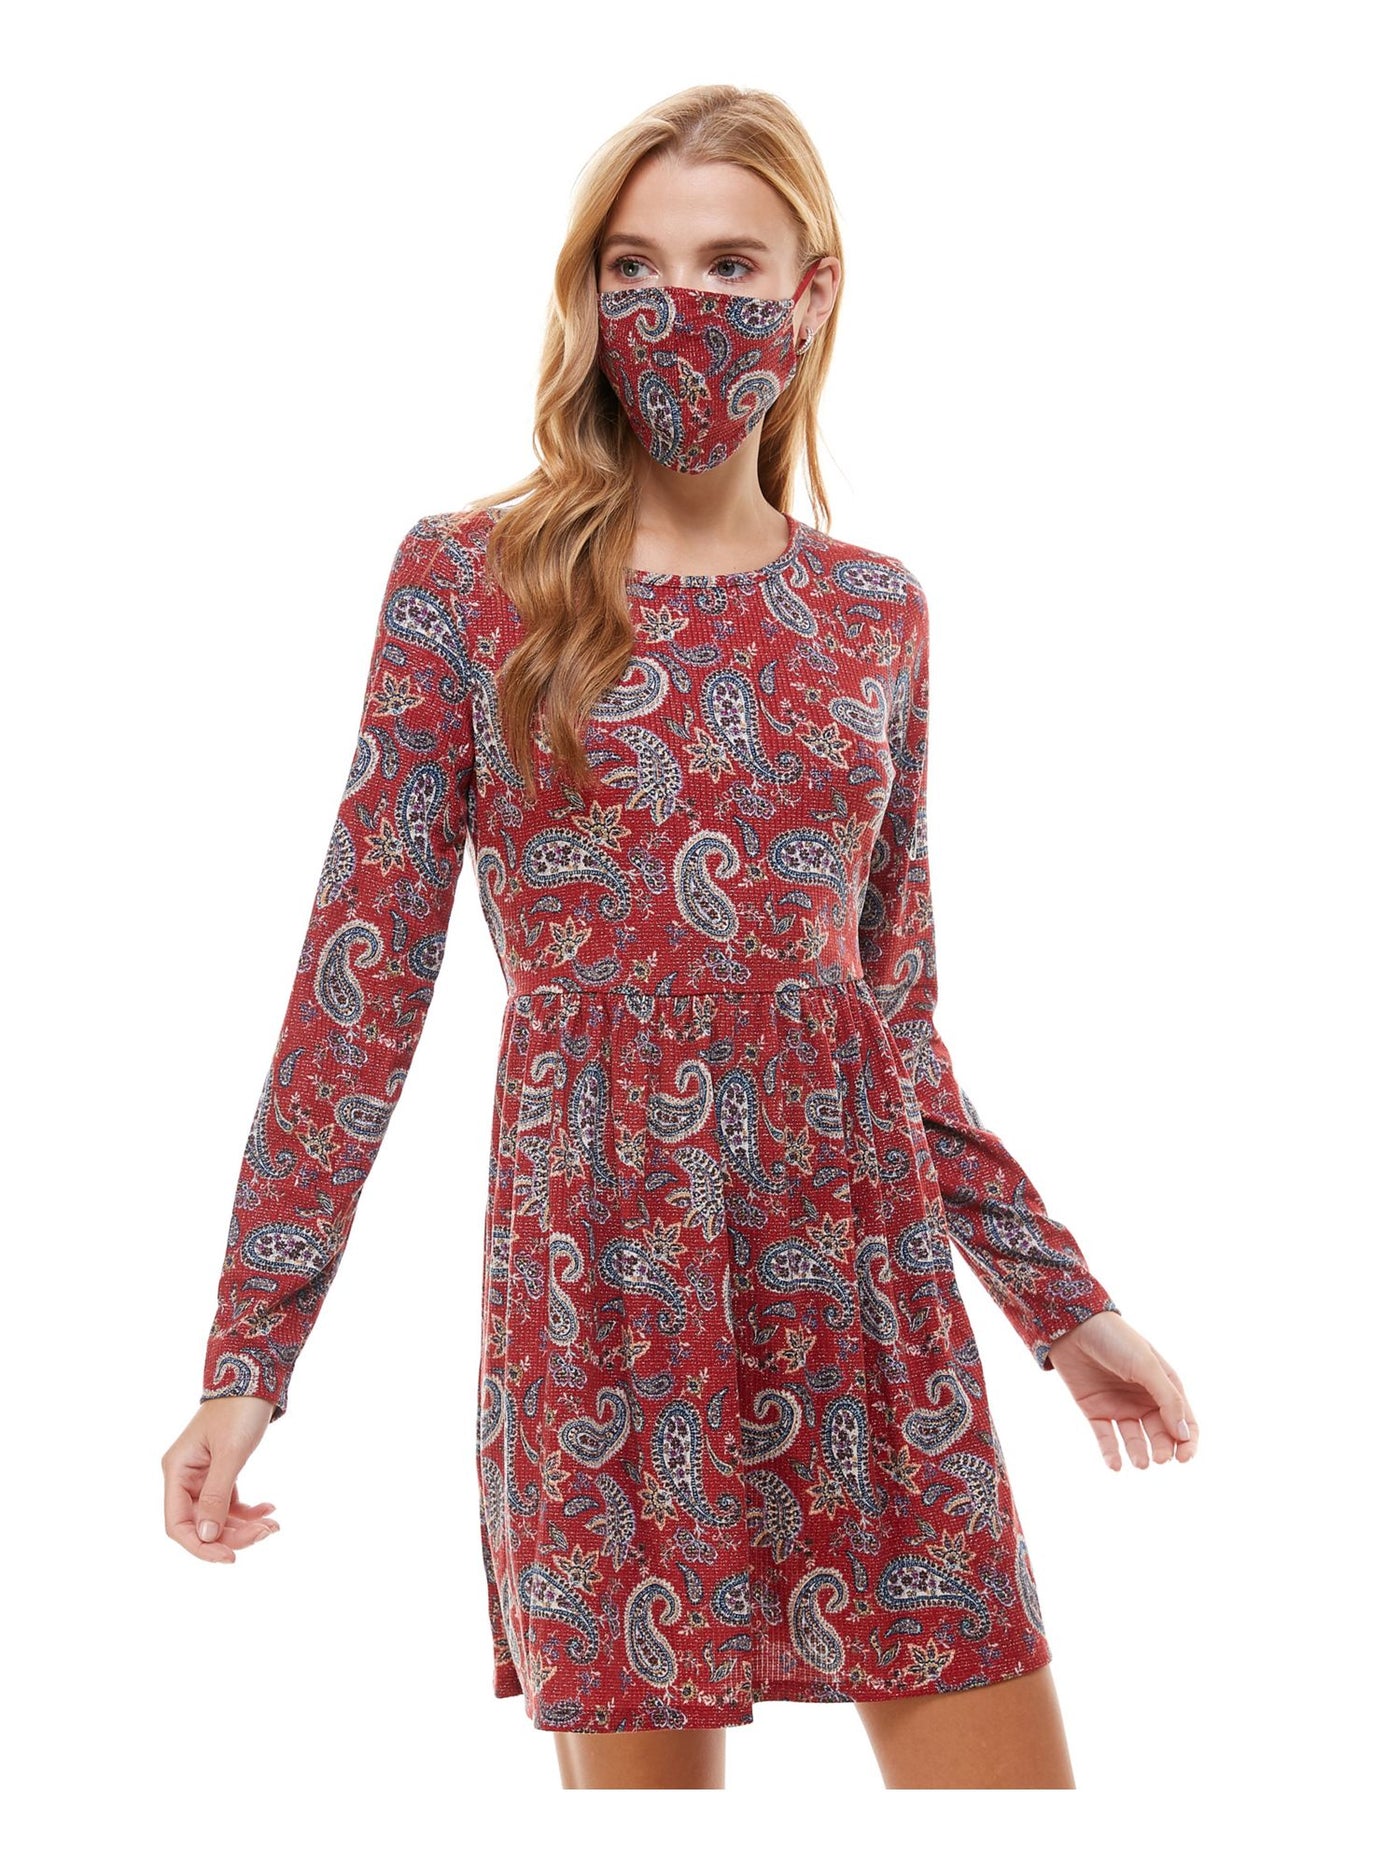 BEBOP Womens Red Paisley Long Sleeve Crew Neck Short Fit + Flare Dress Size: S